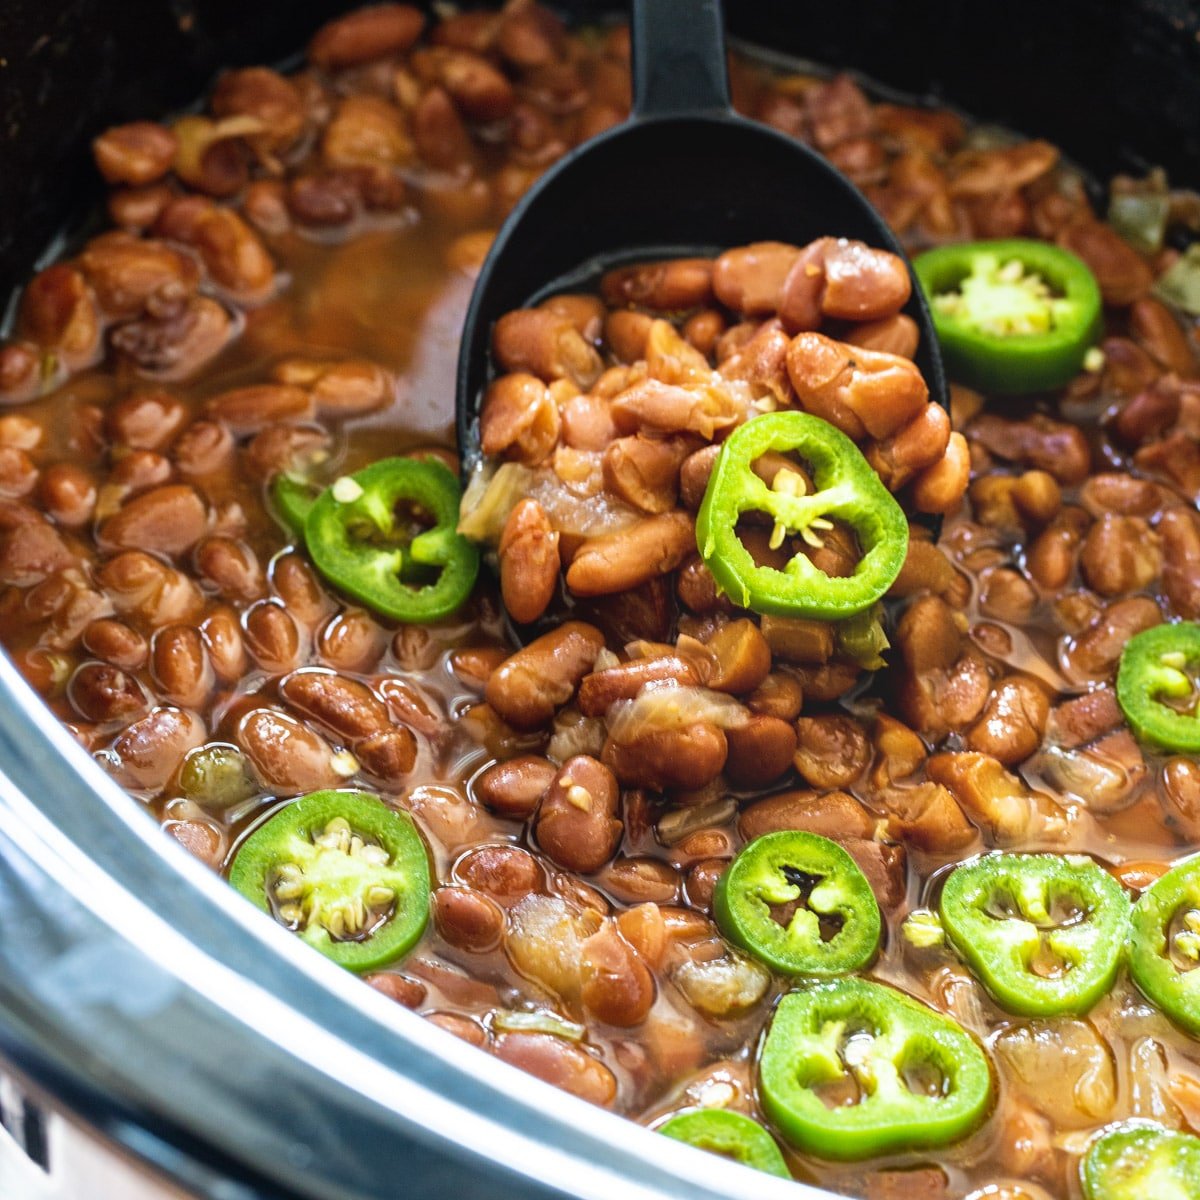 Slow Cooker Spicy Pinto Beans in black crockpot.